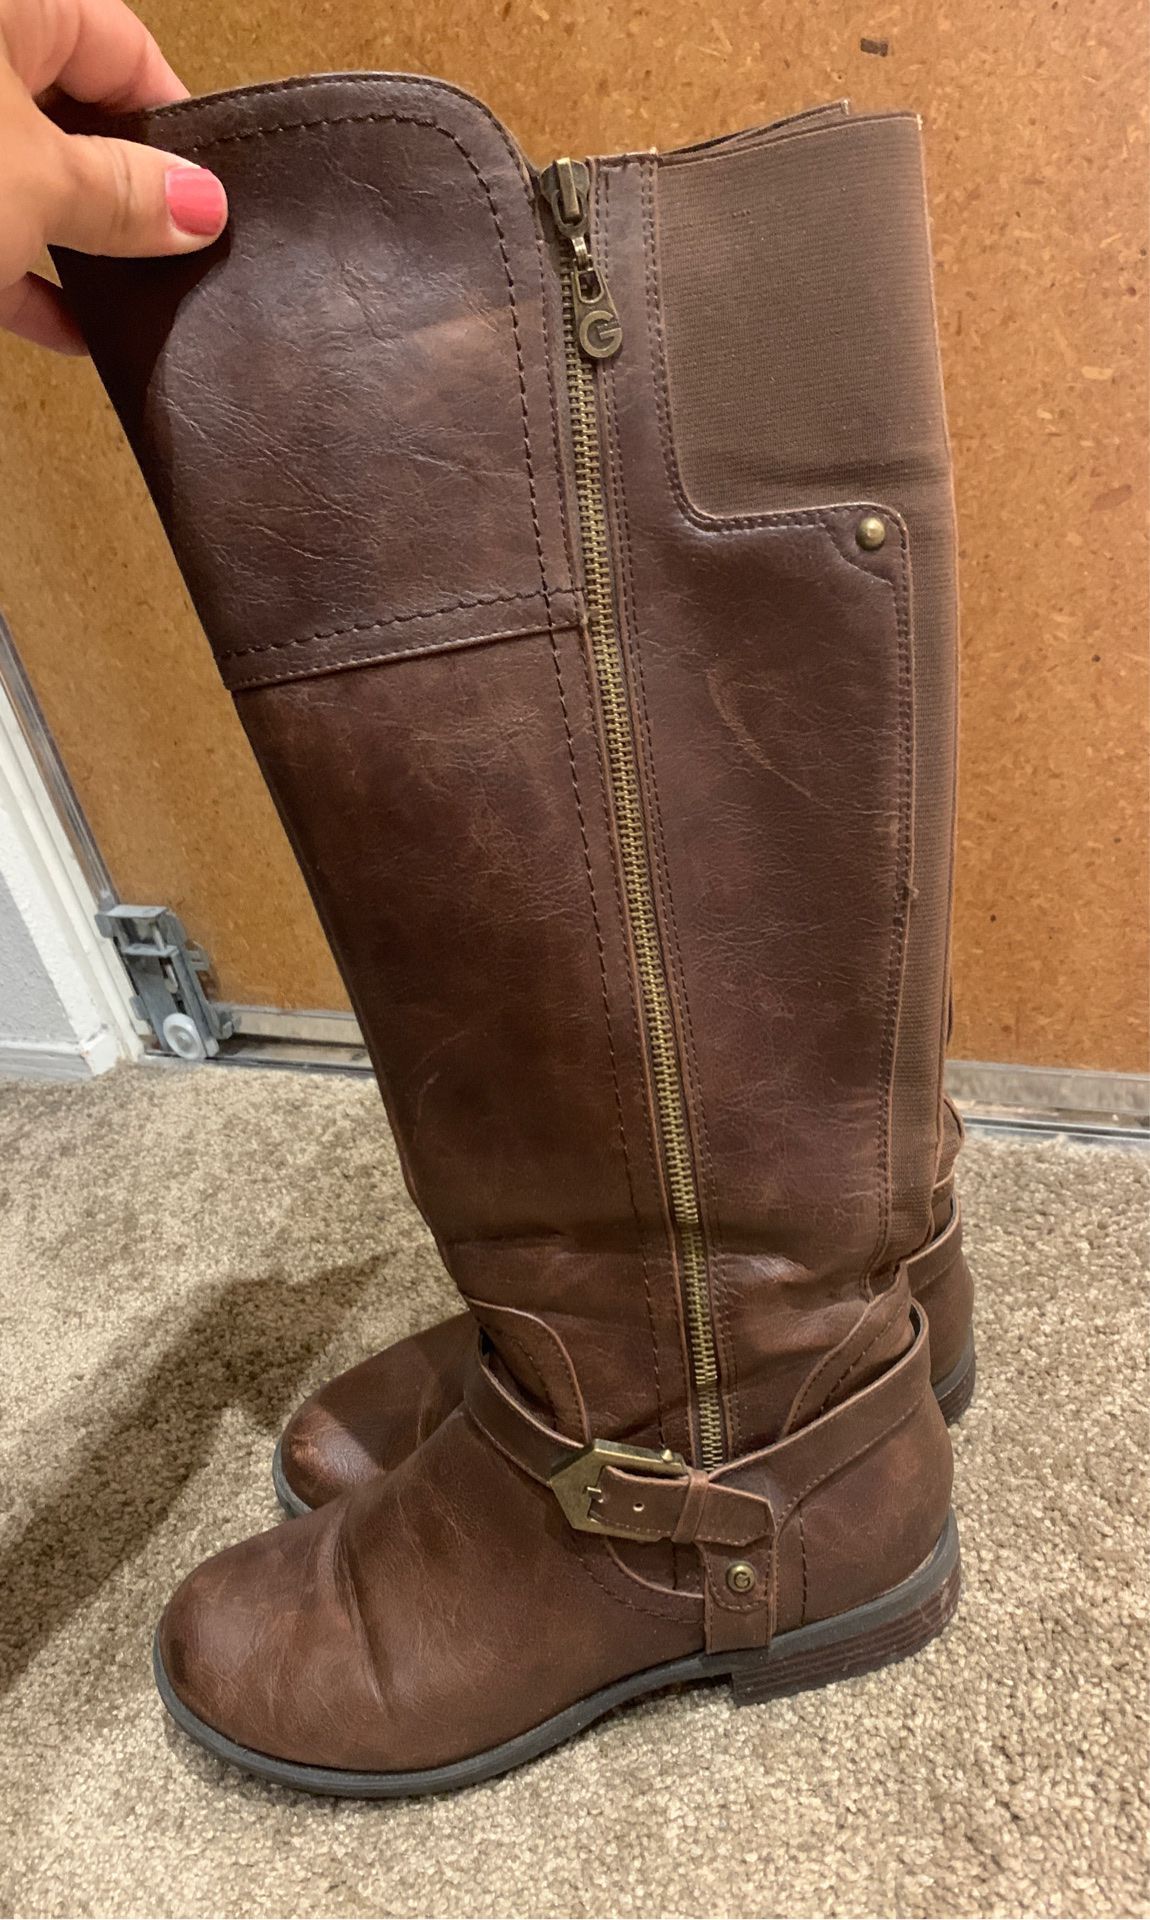 G by Guess Brown Riding Boots - Woman’s Size 9